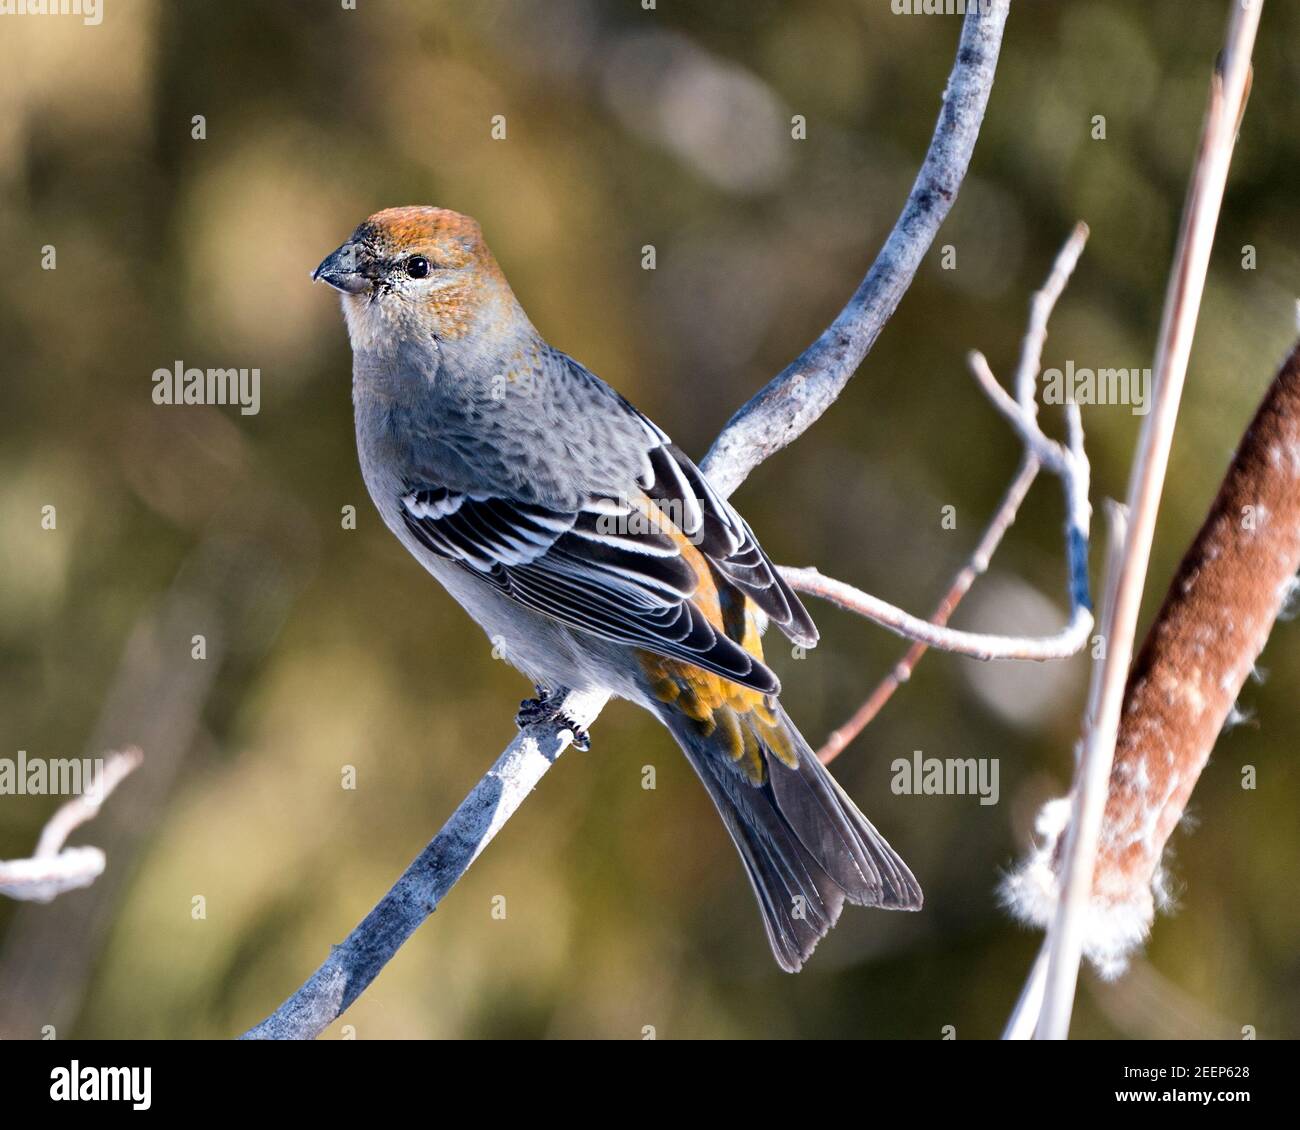 Pine Grosbeak close-up profile view, perched  with a blur background in its environment and habitat. Image. Picture. Portrait. Pine Grosbeak Stock Stock Photo